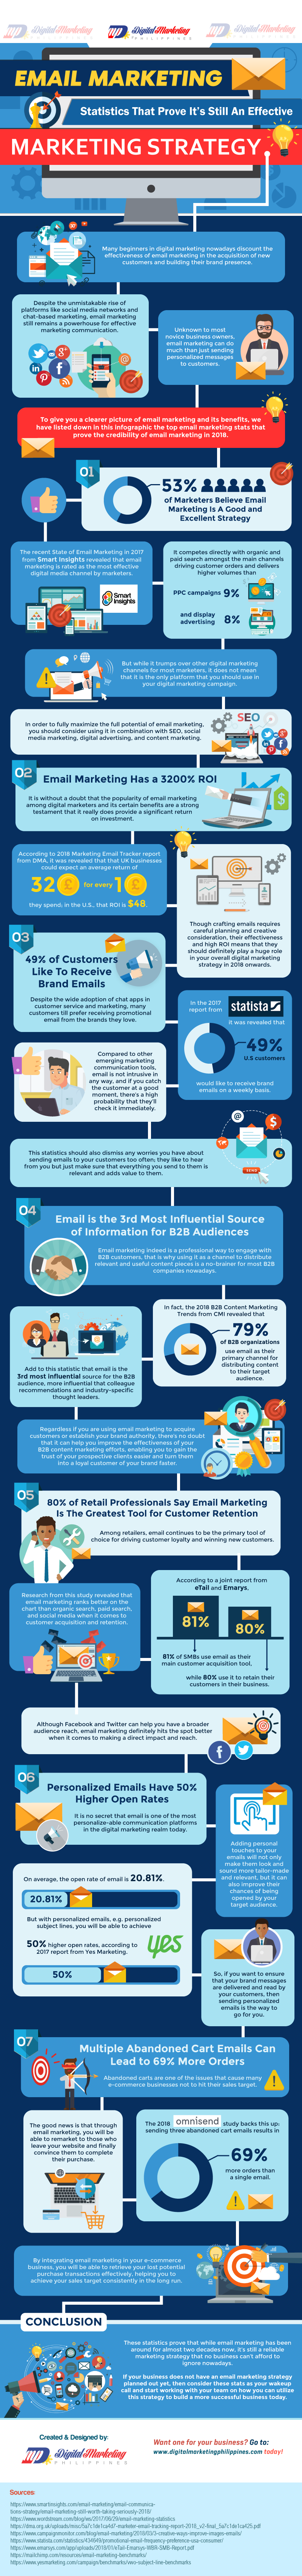 Email Marketing Statistics That Prove It’s Still An Effective Marketing Strategy [Infographic]